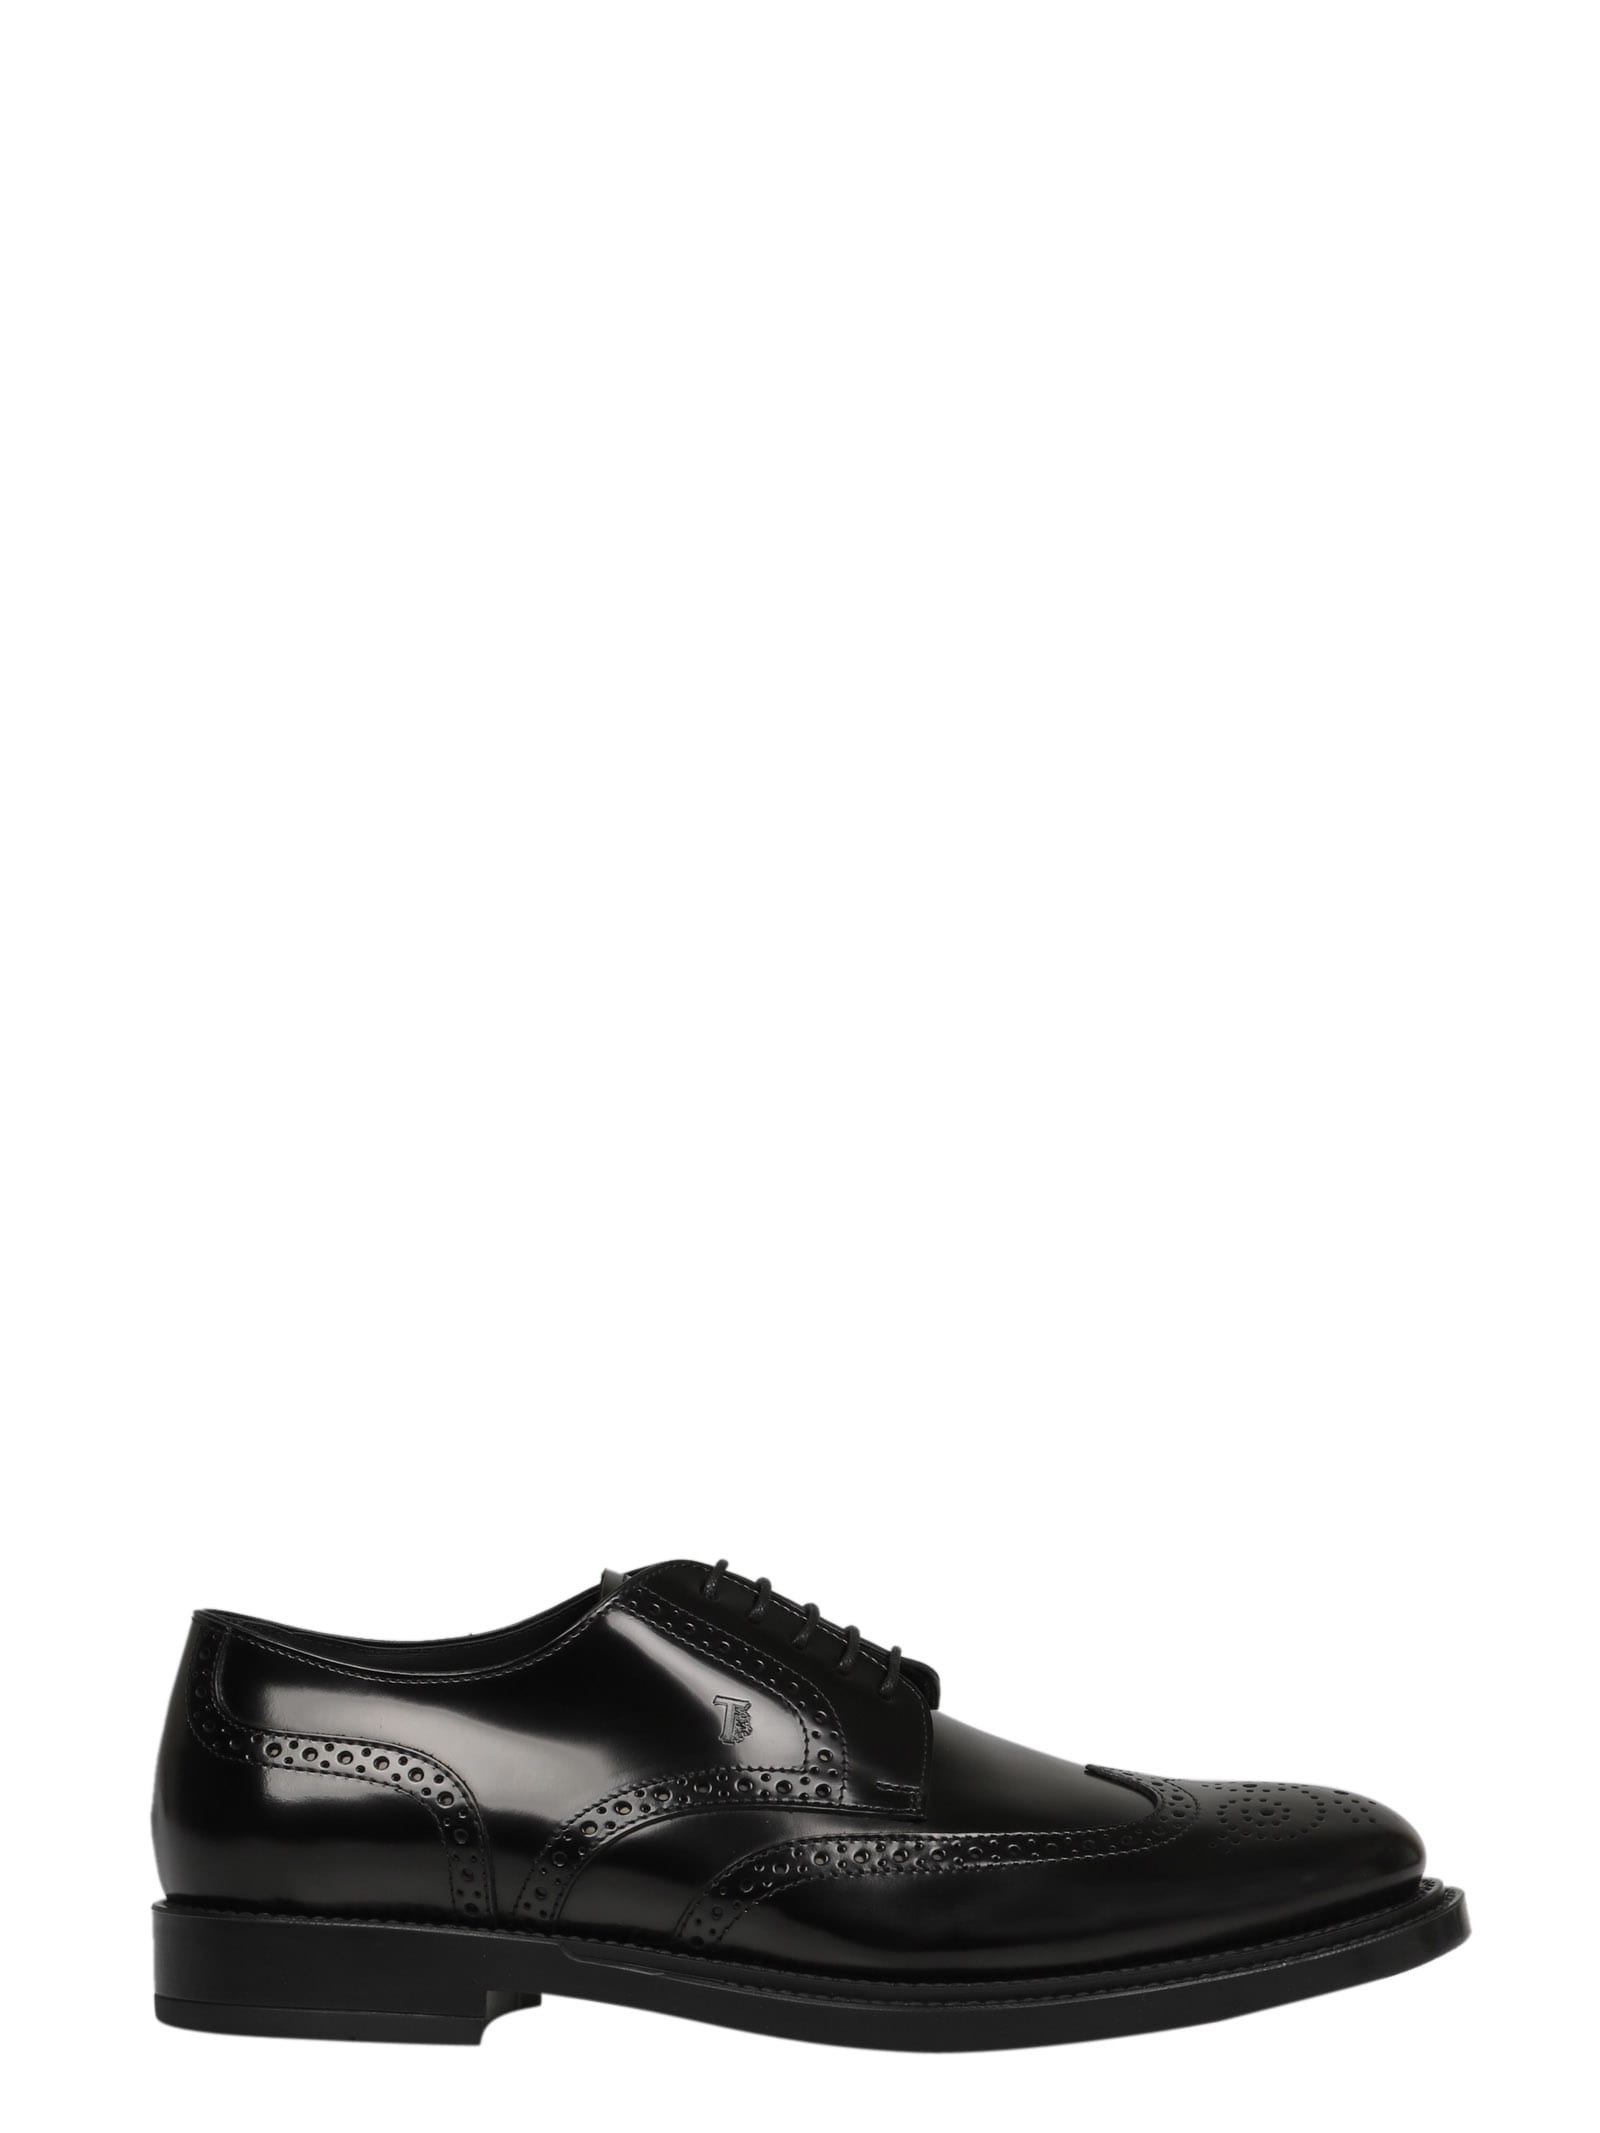 TOD'S PERFORATED DERBY SHOES,XXM62C00C10AKT B999